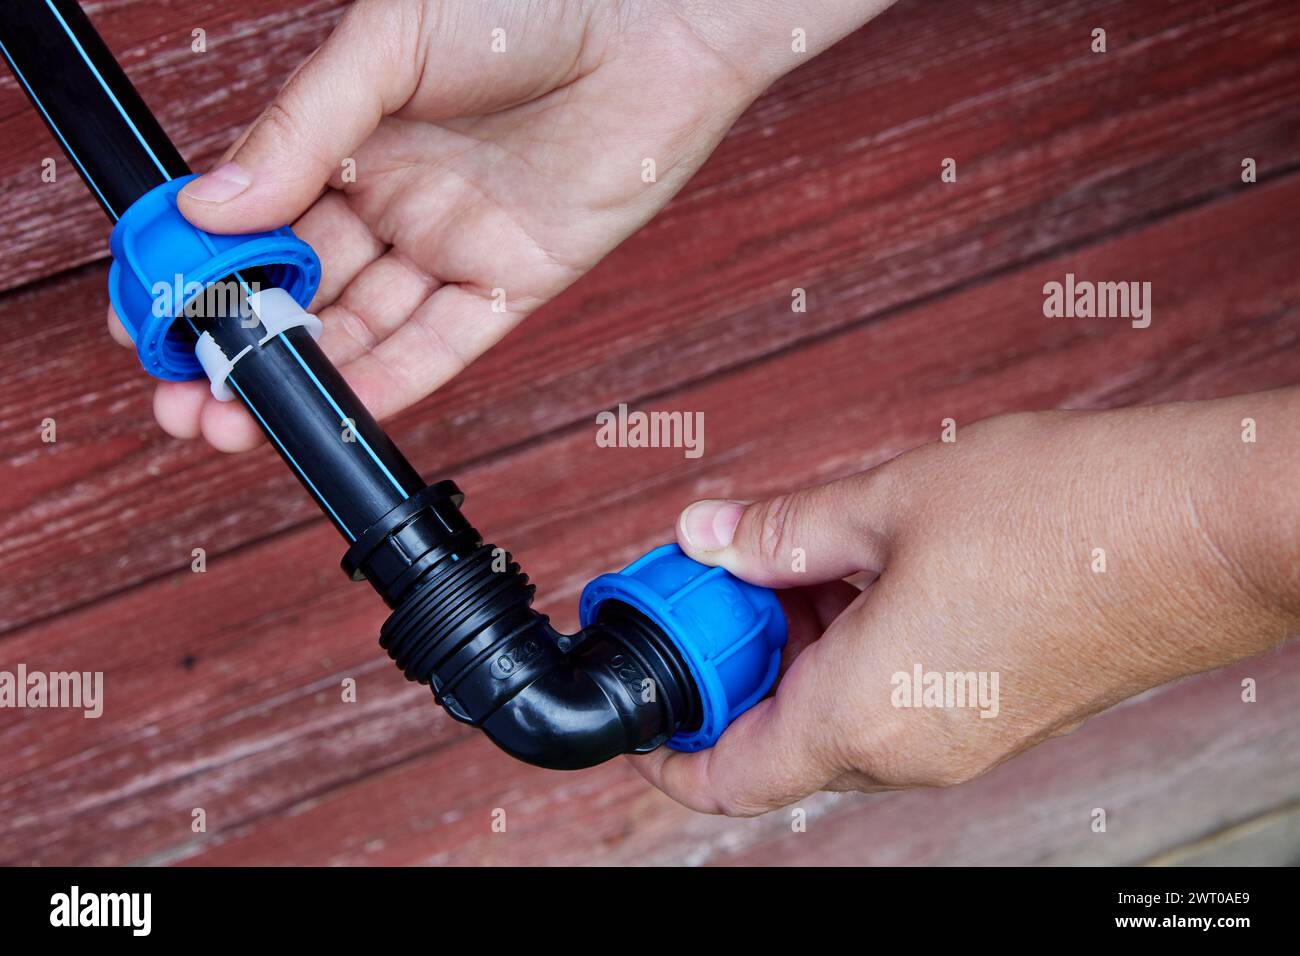 Installation of irrigation water supply using an elbow fitting with compression clamp. Stock Photo